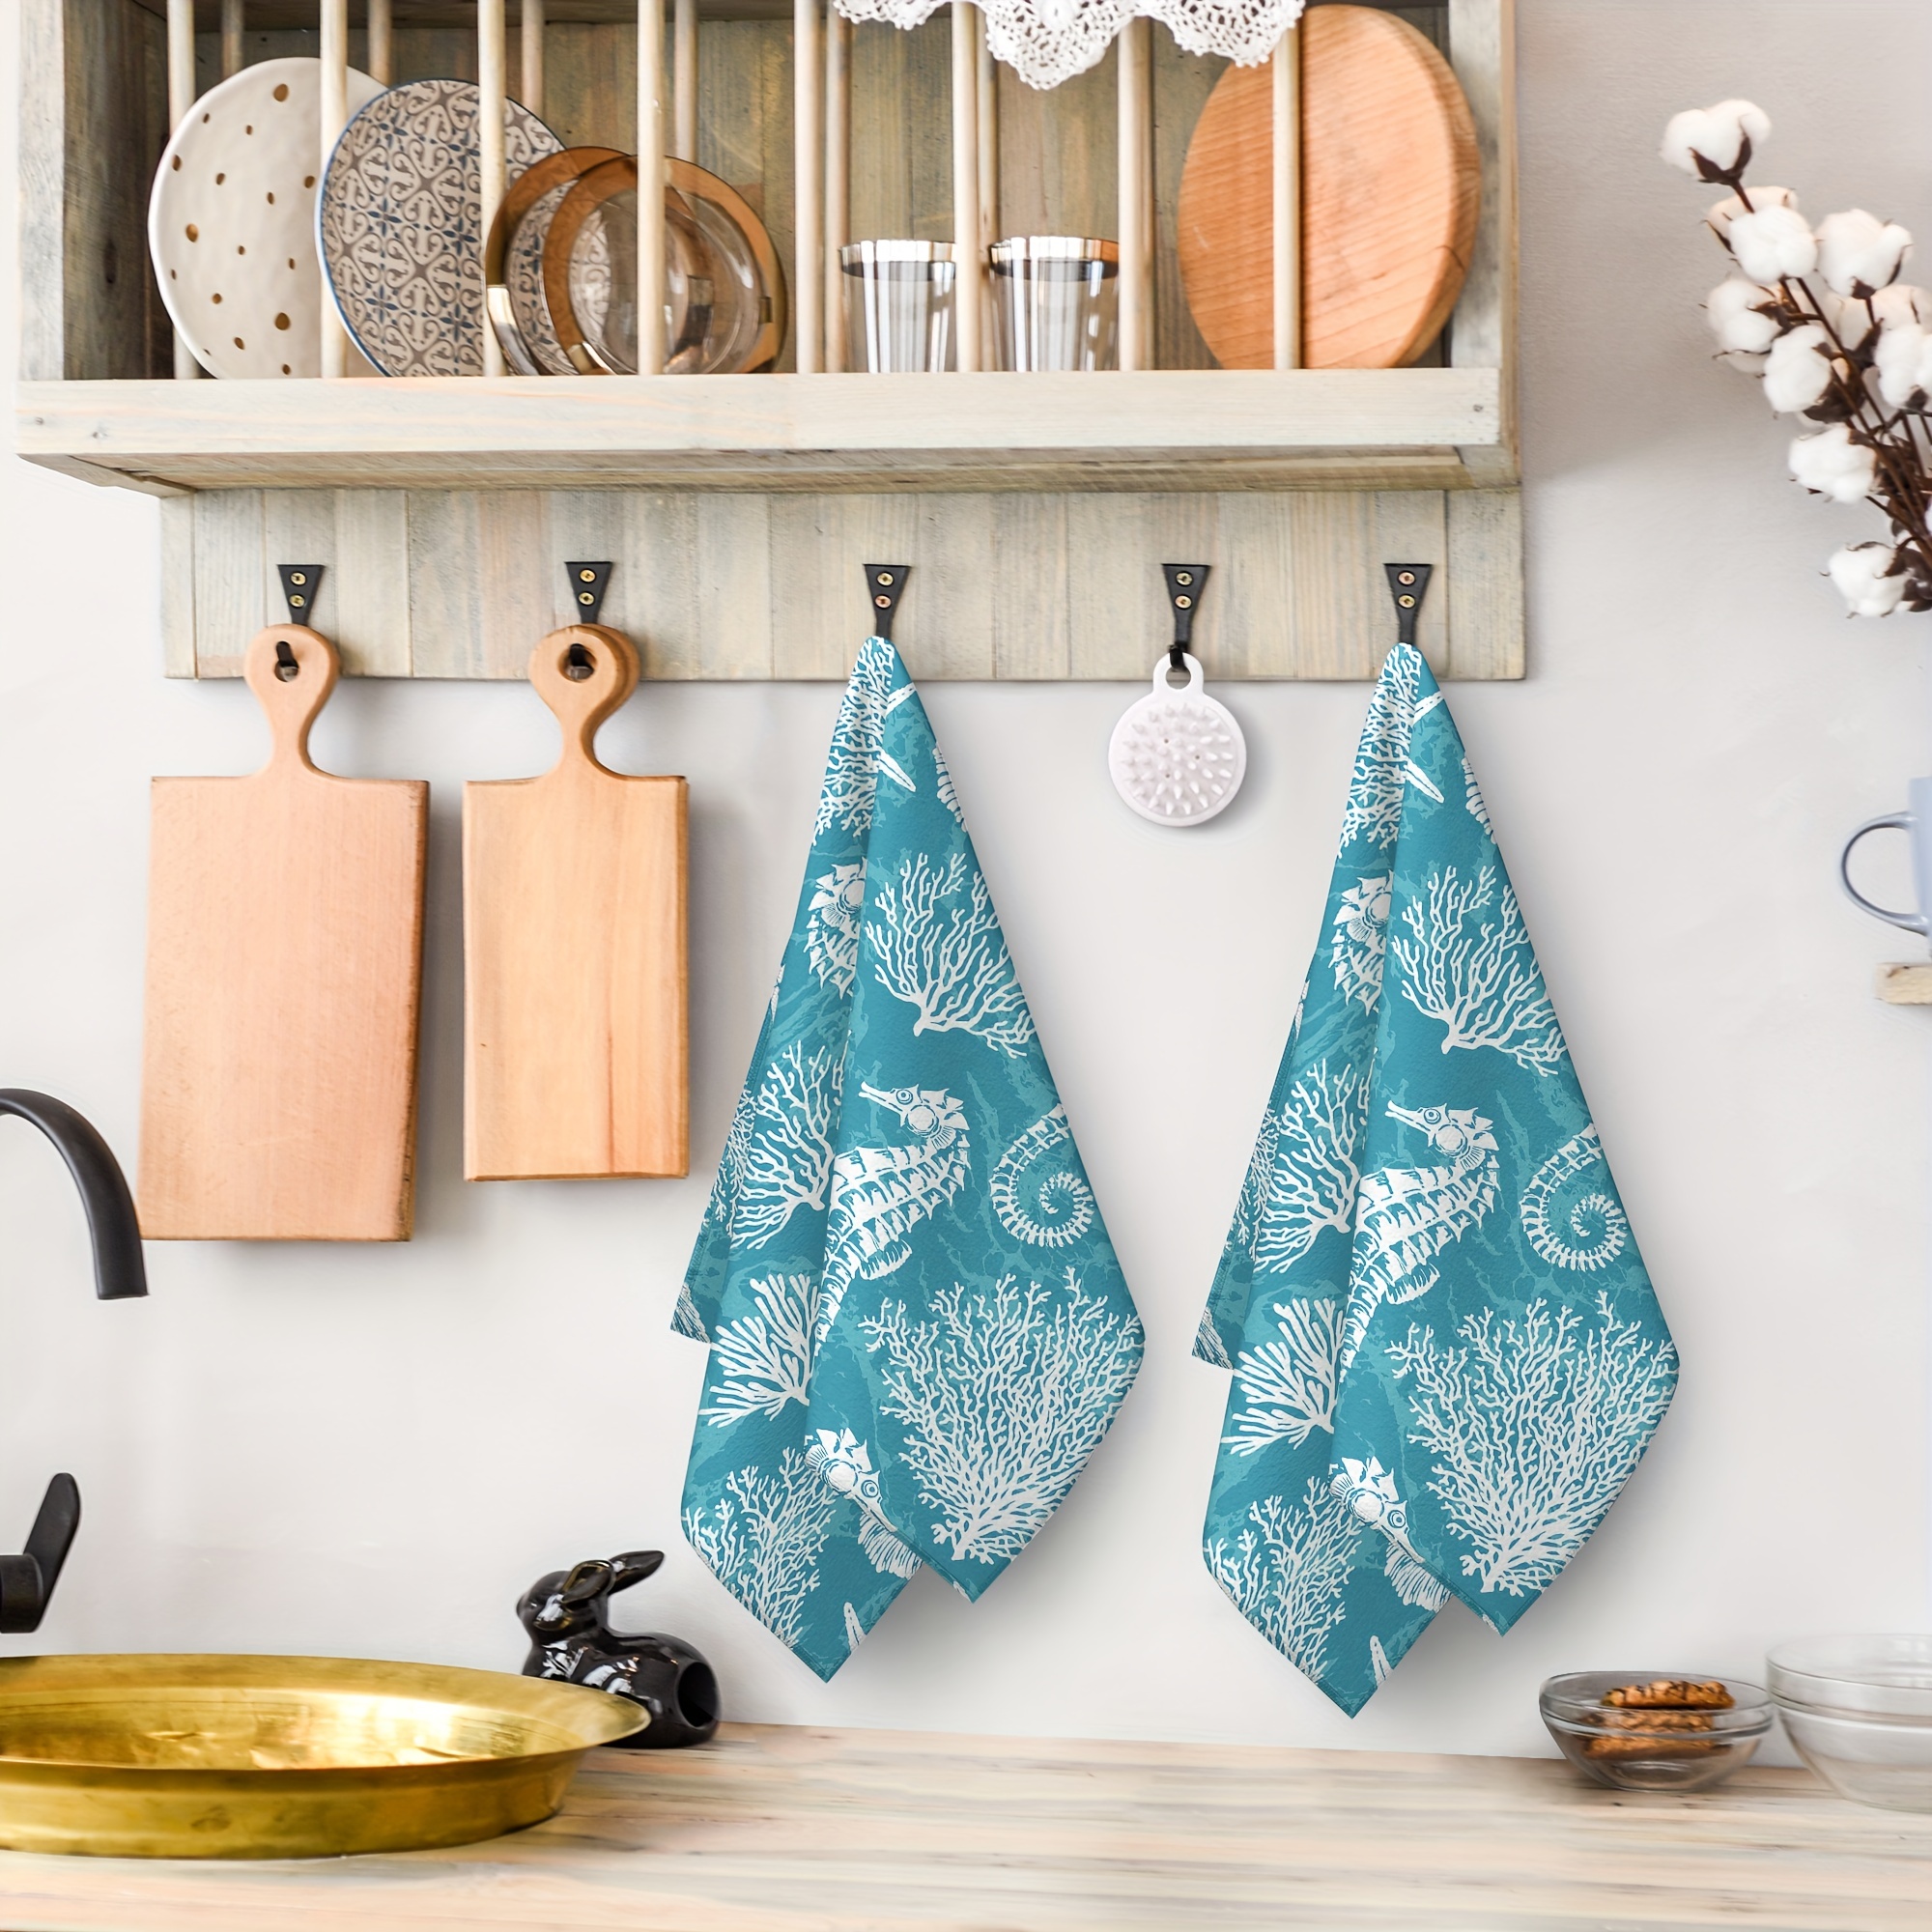 Teal Dish Towels for Kitchen, Absorbent Cotton Kitchen Towels for